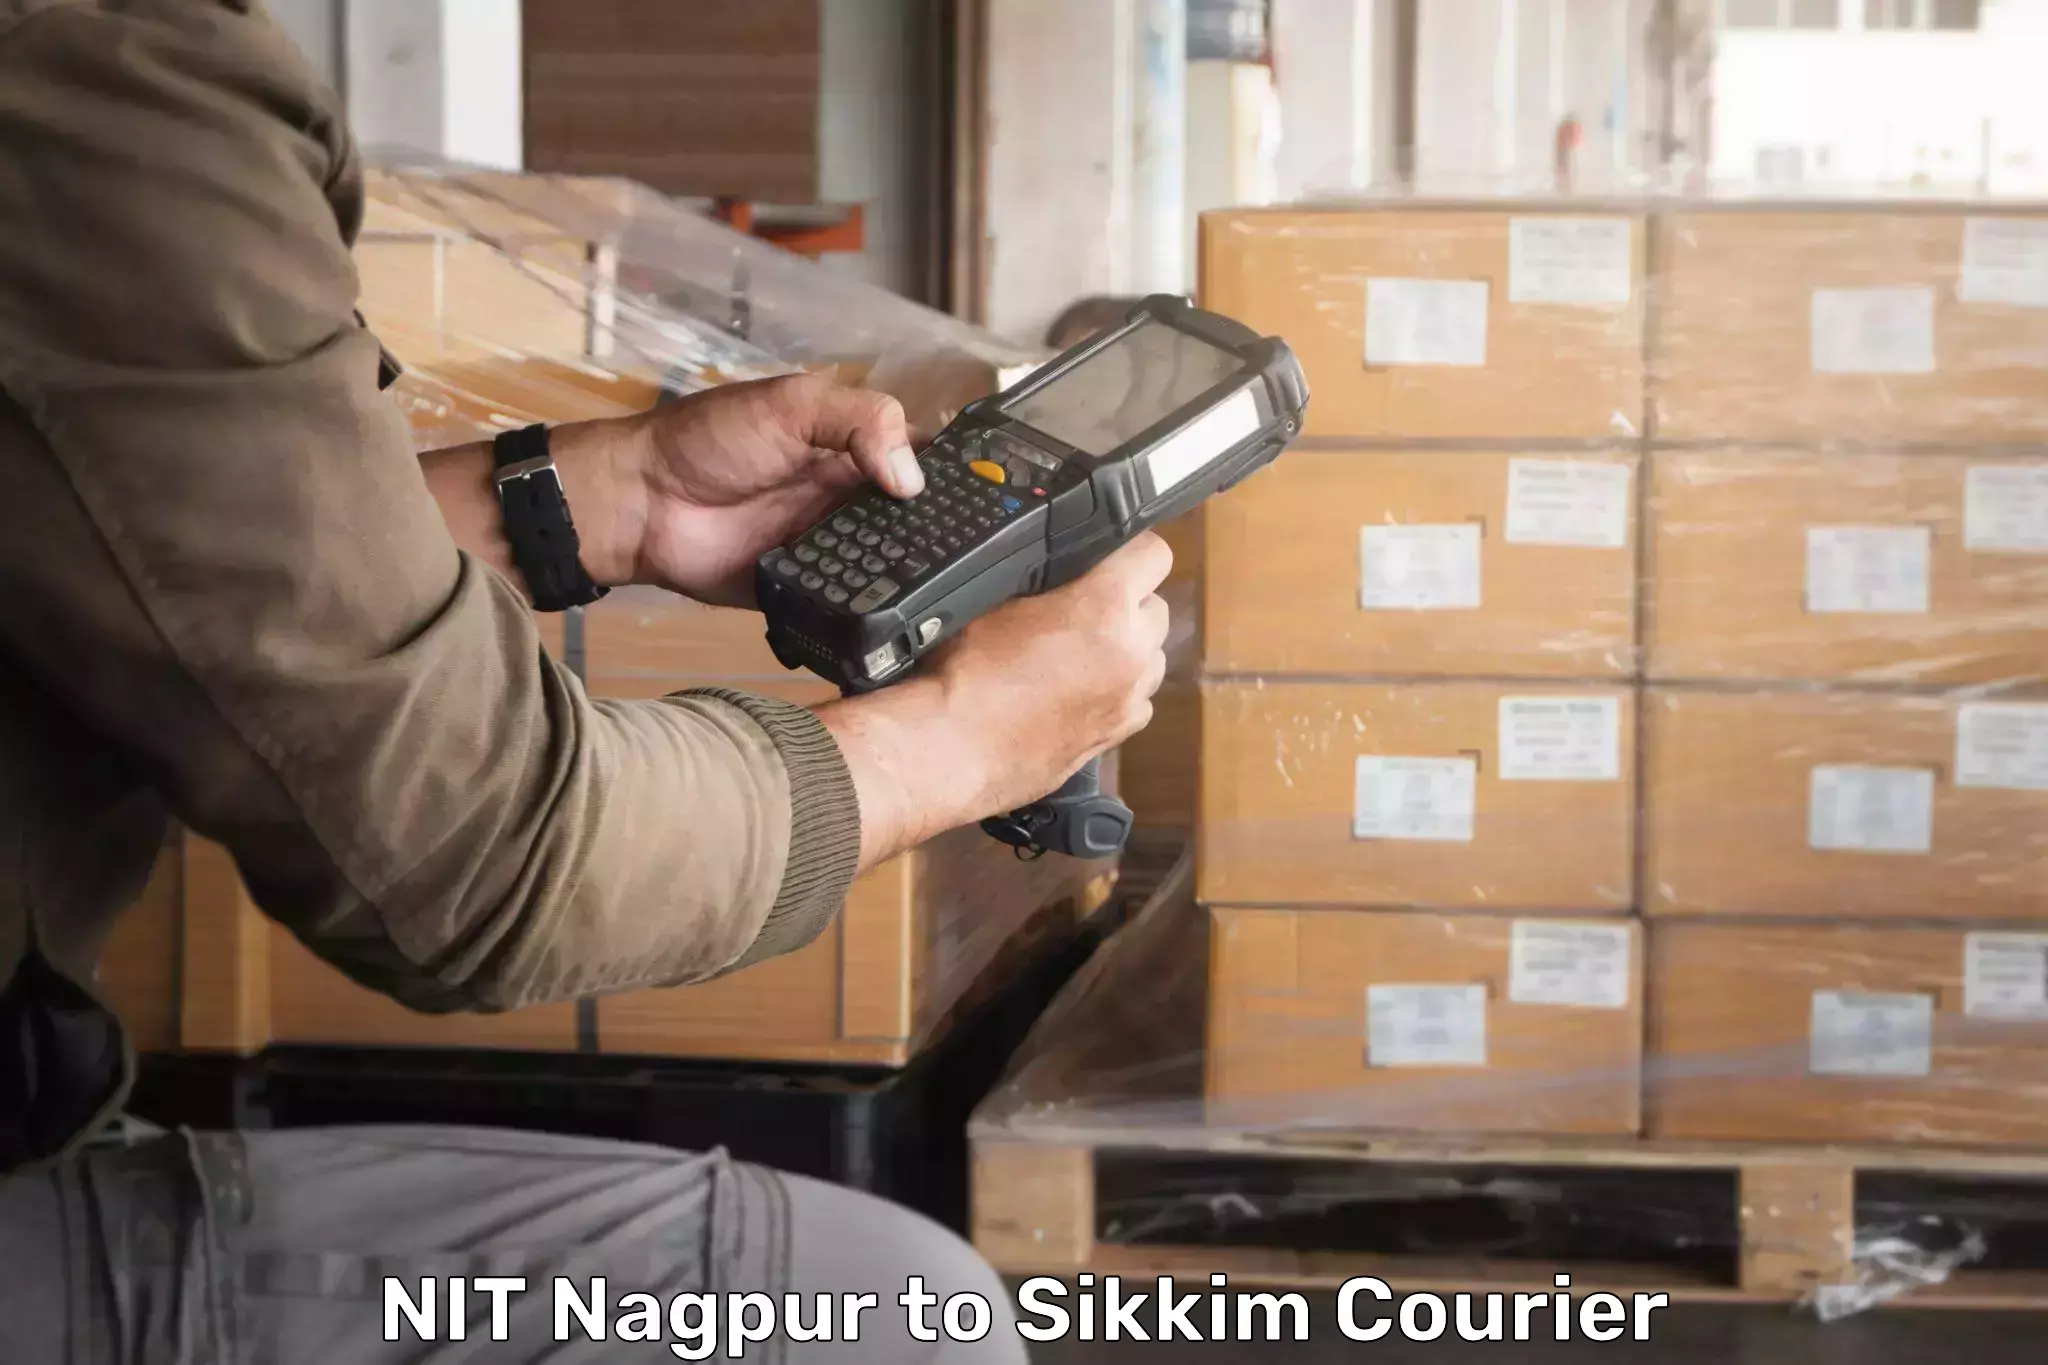 Express delivery network NIT Nagpur to North Sikkim